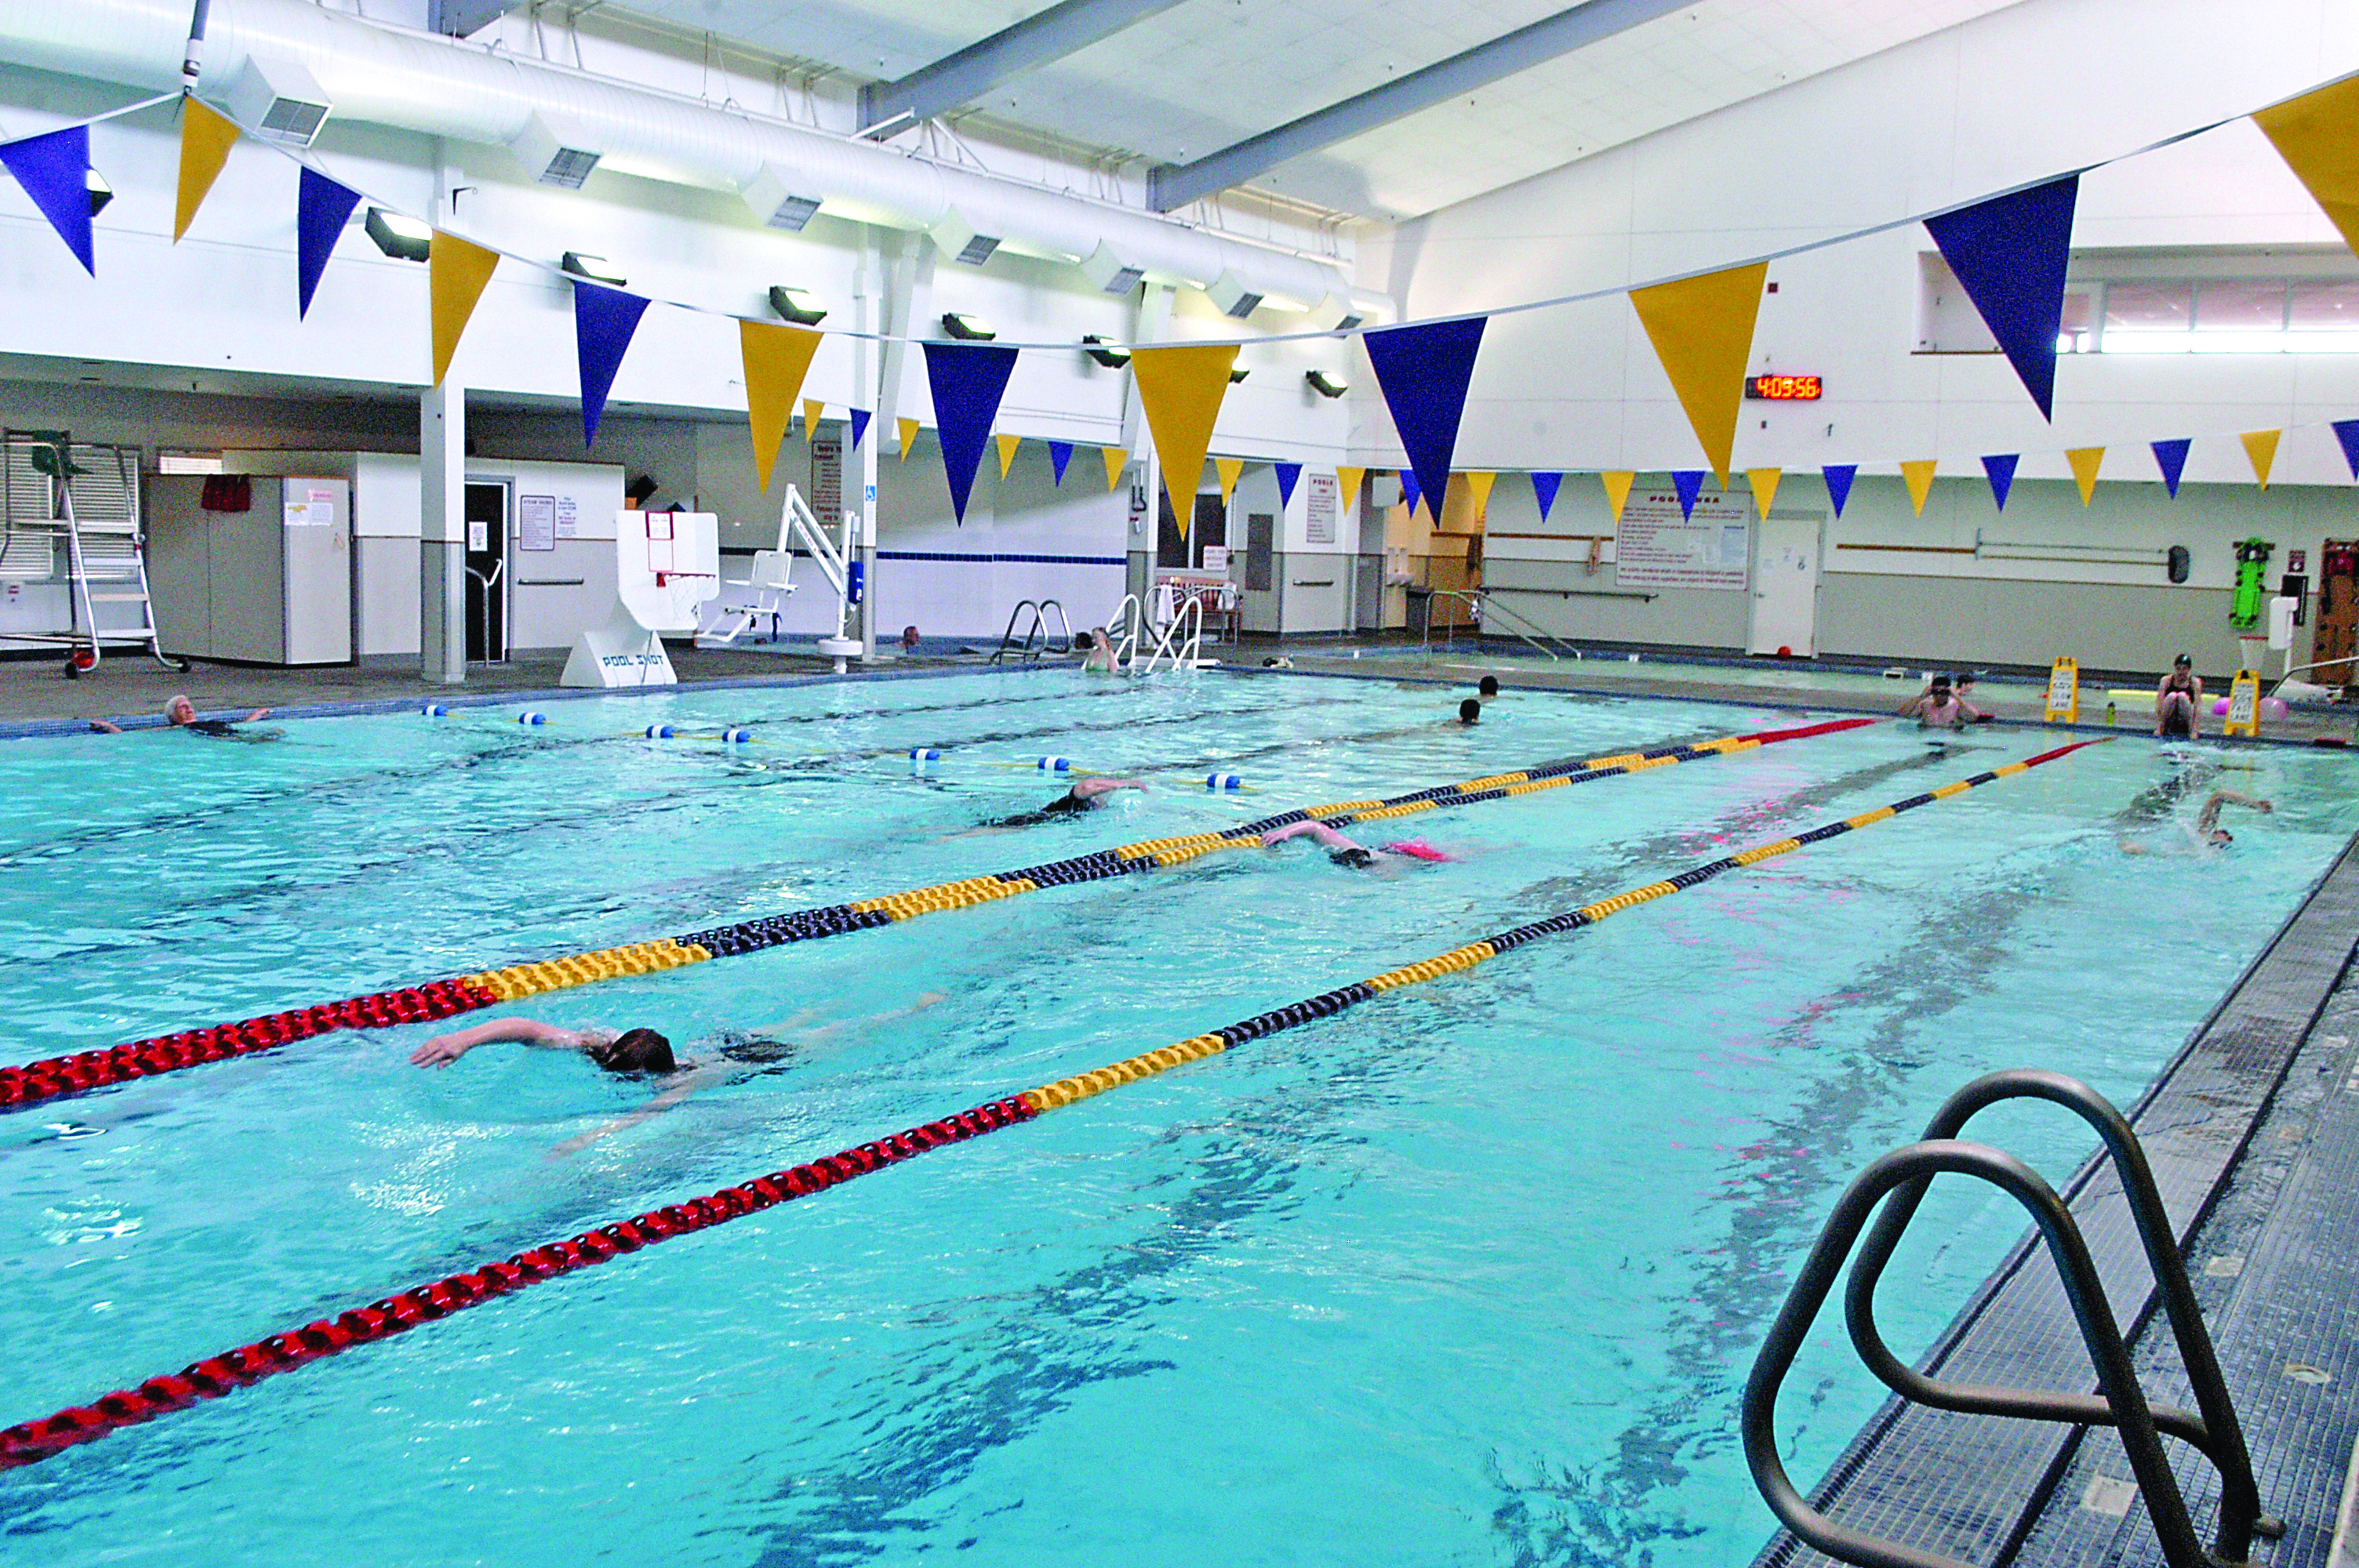 Clallam Commissioners said this week they will open bids for the Carlsborg sewer project before committing funds for the Sequim Aquatic Recreation Center. (Chris McDaniel/Peninsula Daily News)